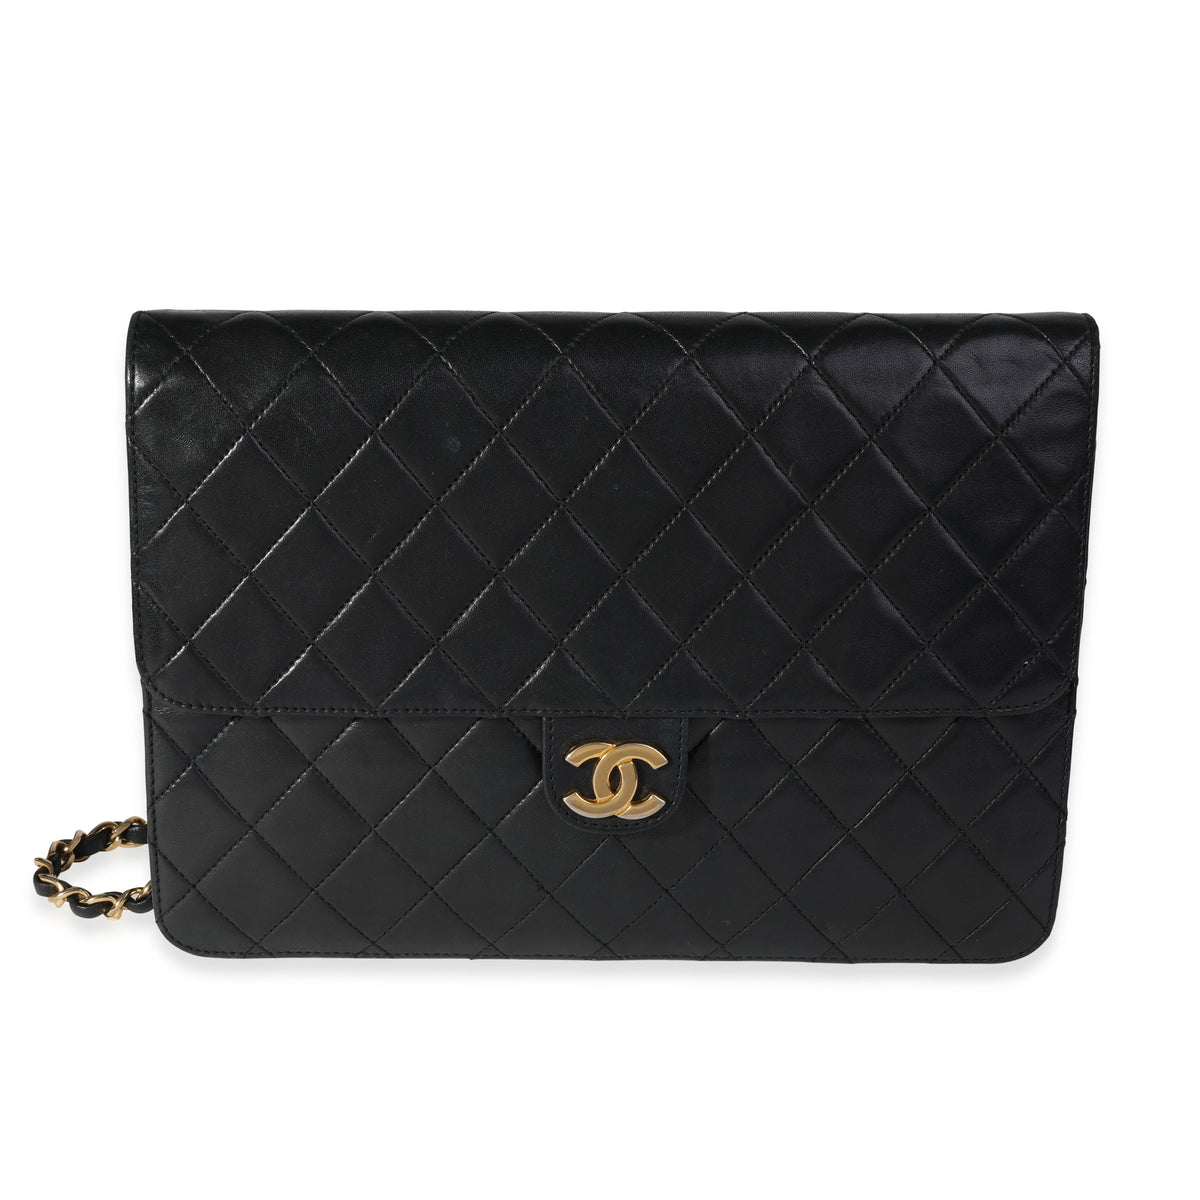 Chanel Classic Medium Zipped Cosmetic Pouch in Black Lambskin - SOLD